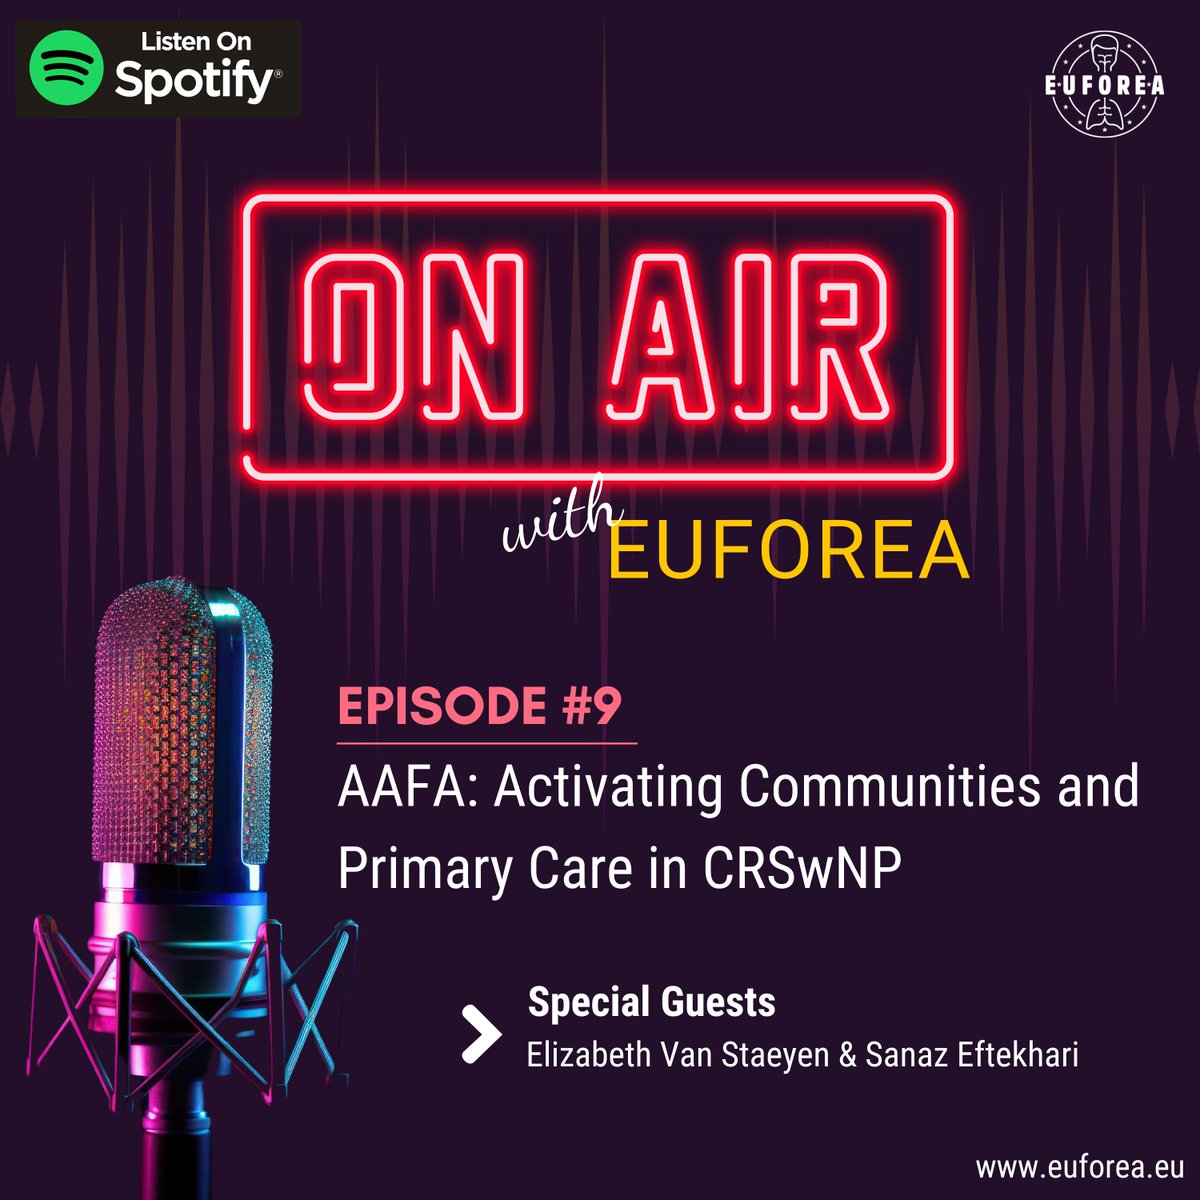 🎙 On today's Global Chronic Rhinosinusitis with Nasal Polyps (#CRSwNP) Awareness Day, EUFOREA interviews Sanaz Eftekhari from @AAFANational on 'Activating Communities and Primary Care in CRSwNP'. Listen to the new episode of ON AIR with EUFOREA #podcast rss.com/podcasts/onair…